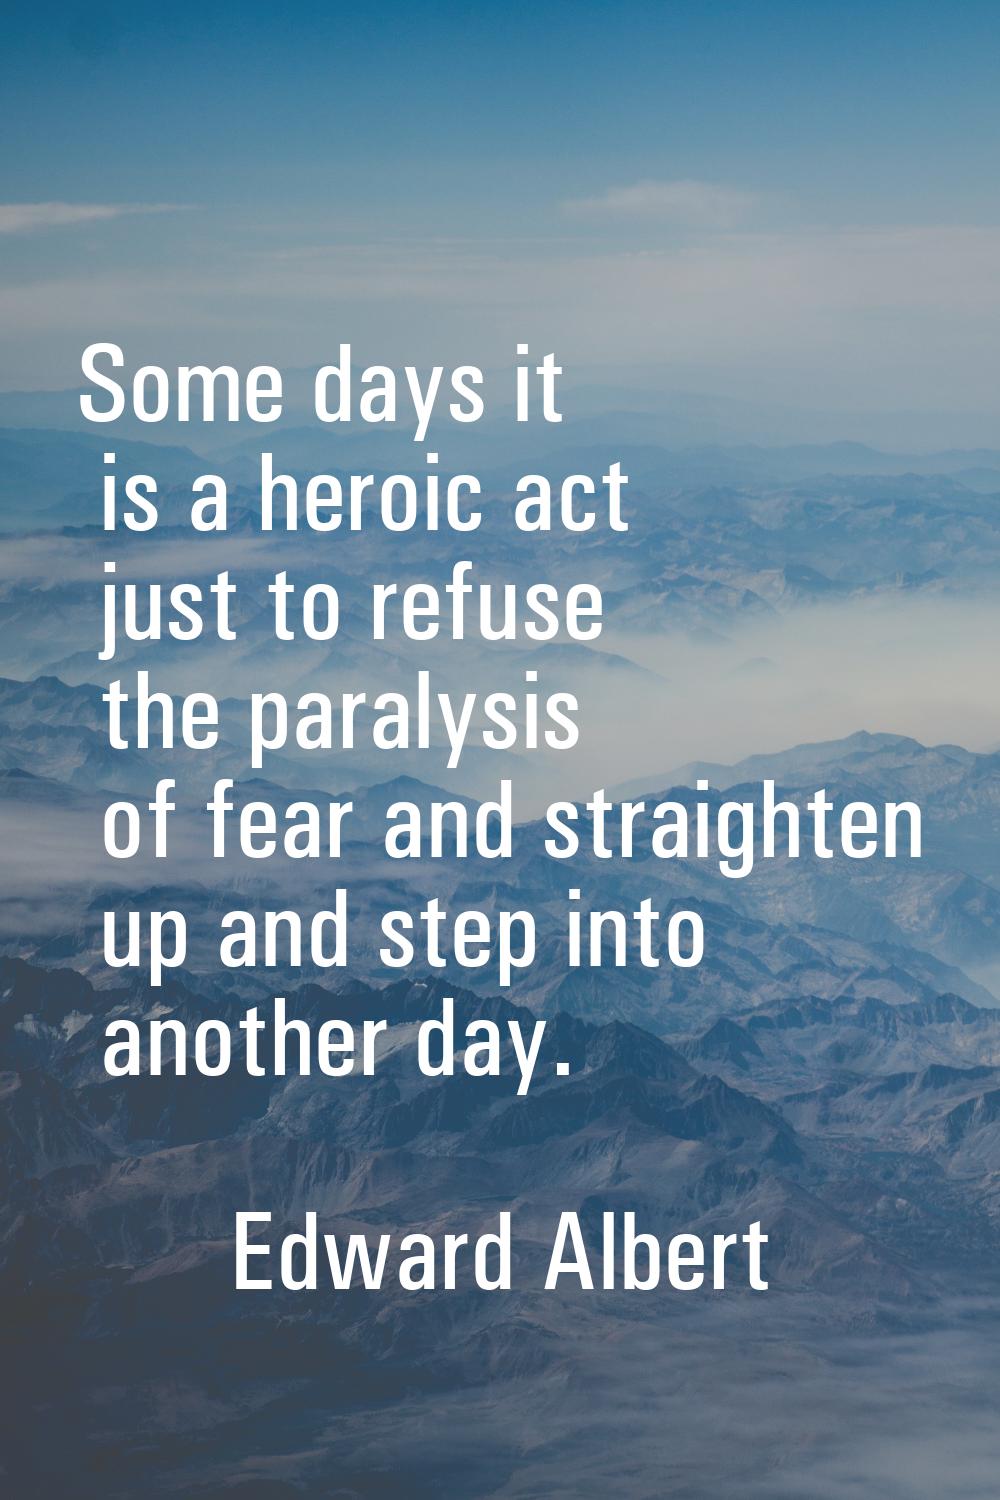 Some days it is a heroic act just to refuse the paralysis of fear and straighten up and step into a